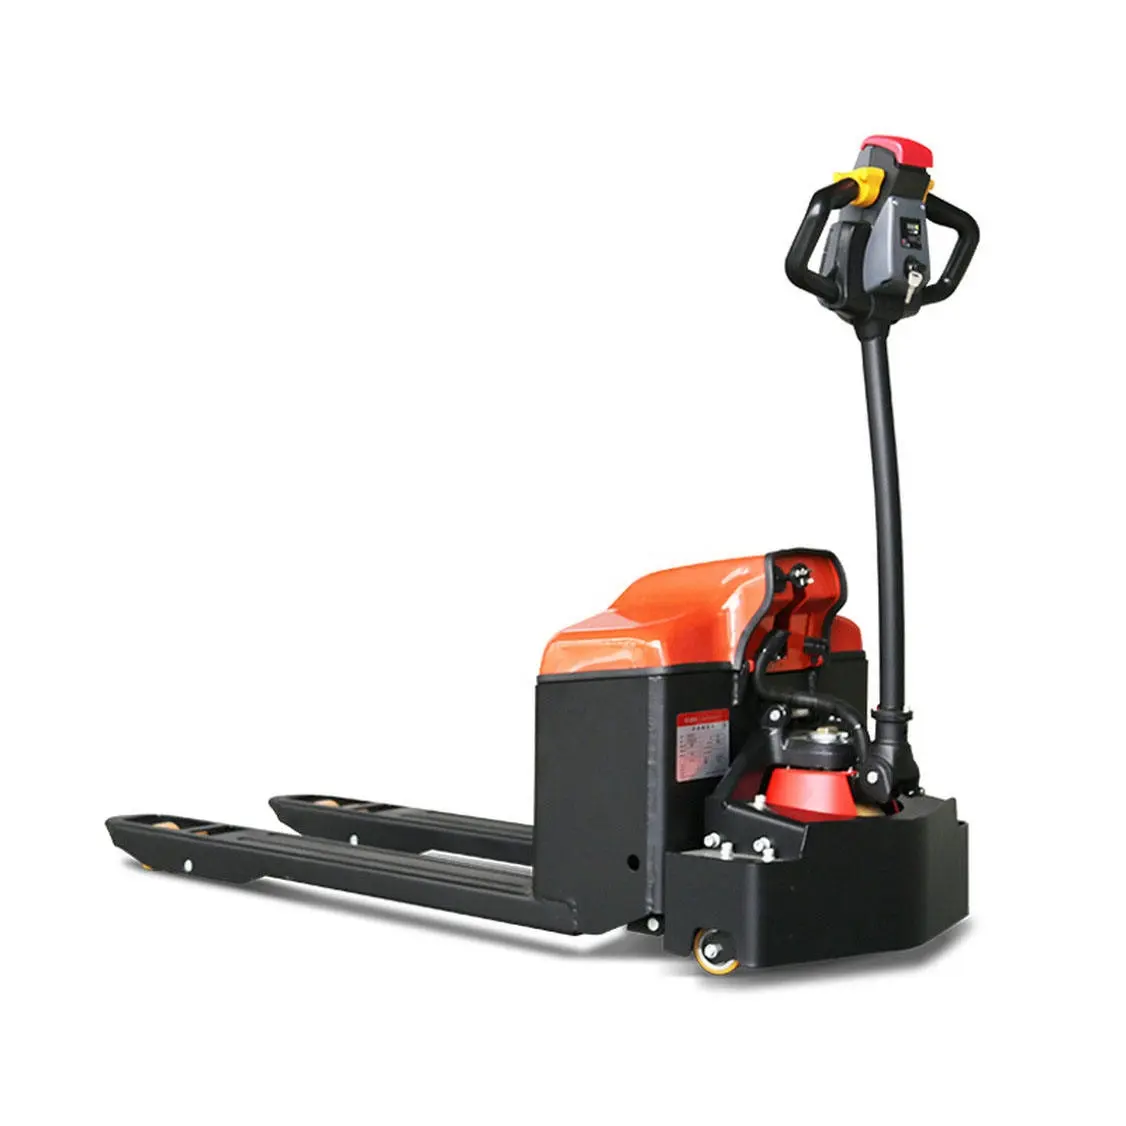 3t hydraulic lift best manual motorized mini battery operated electric hand pallet jack,pallet jacks,electric jack pallet